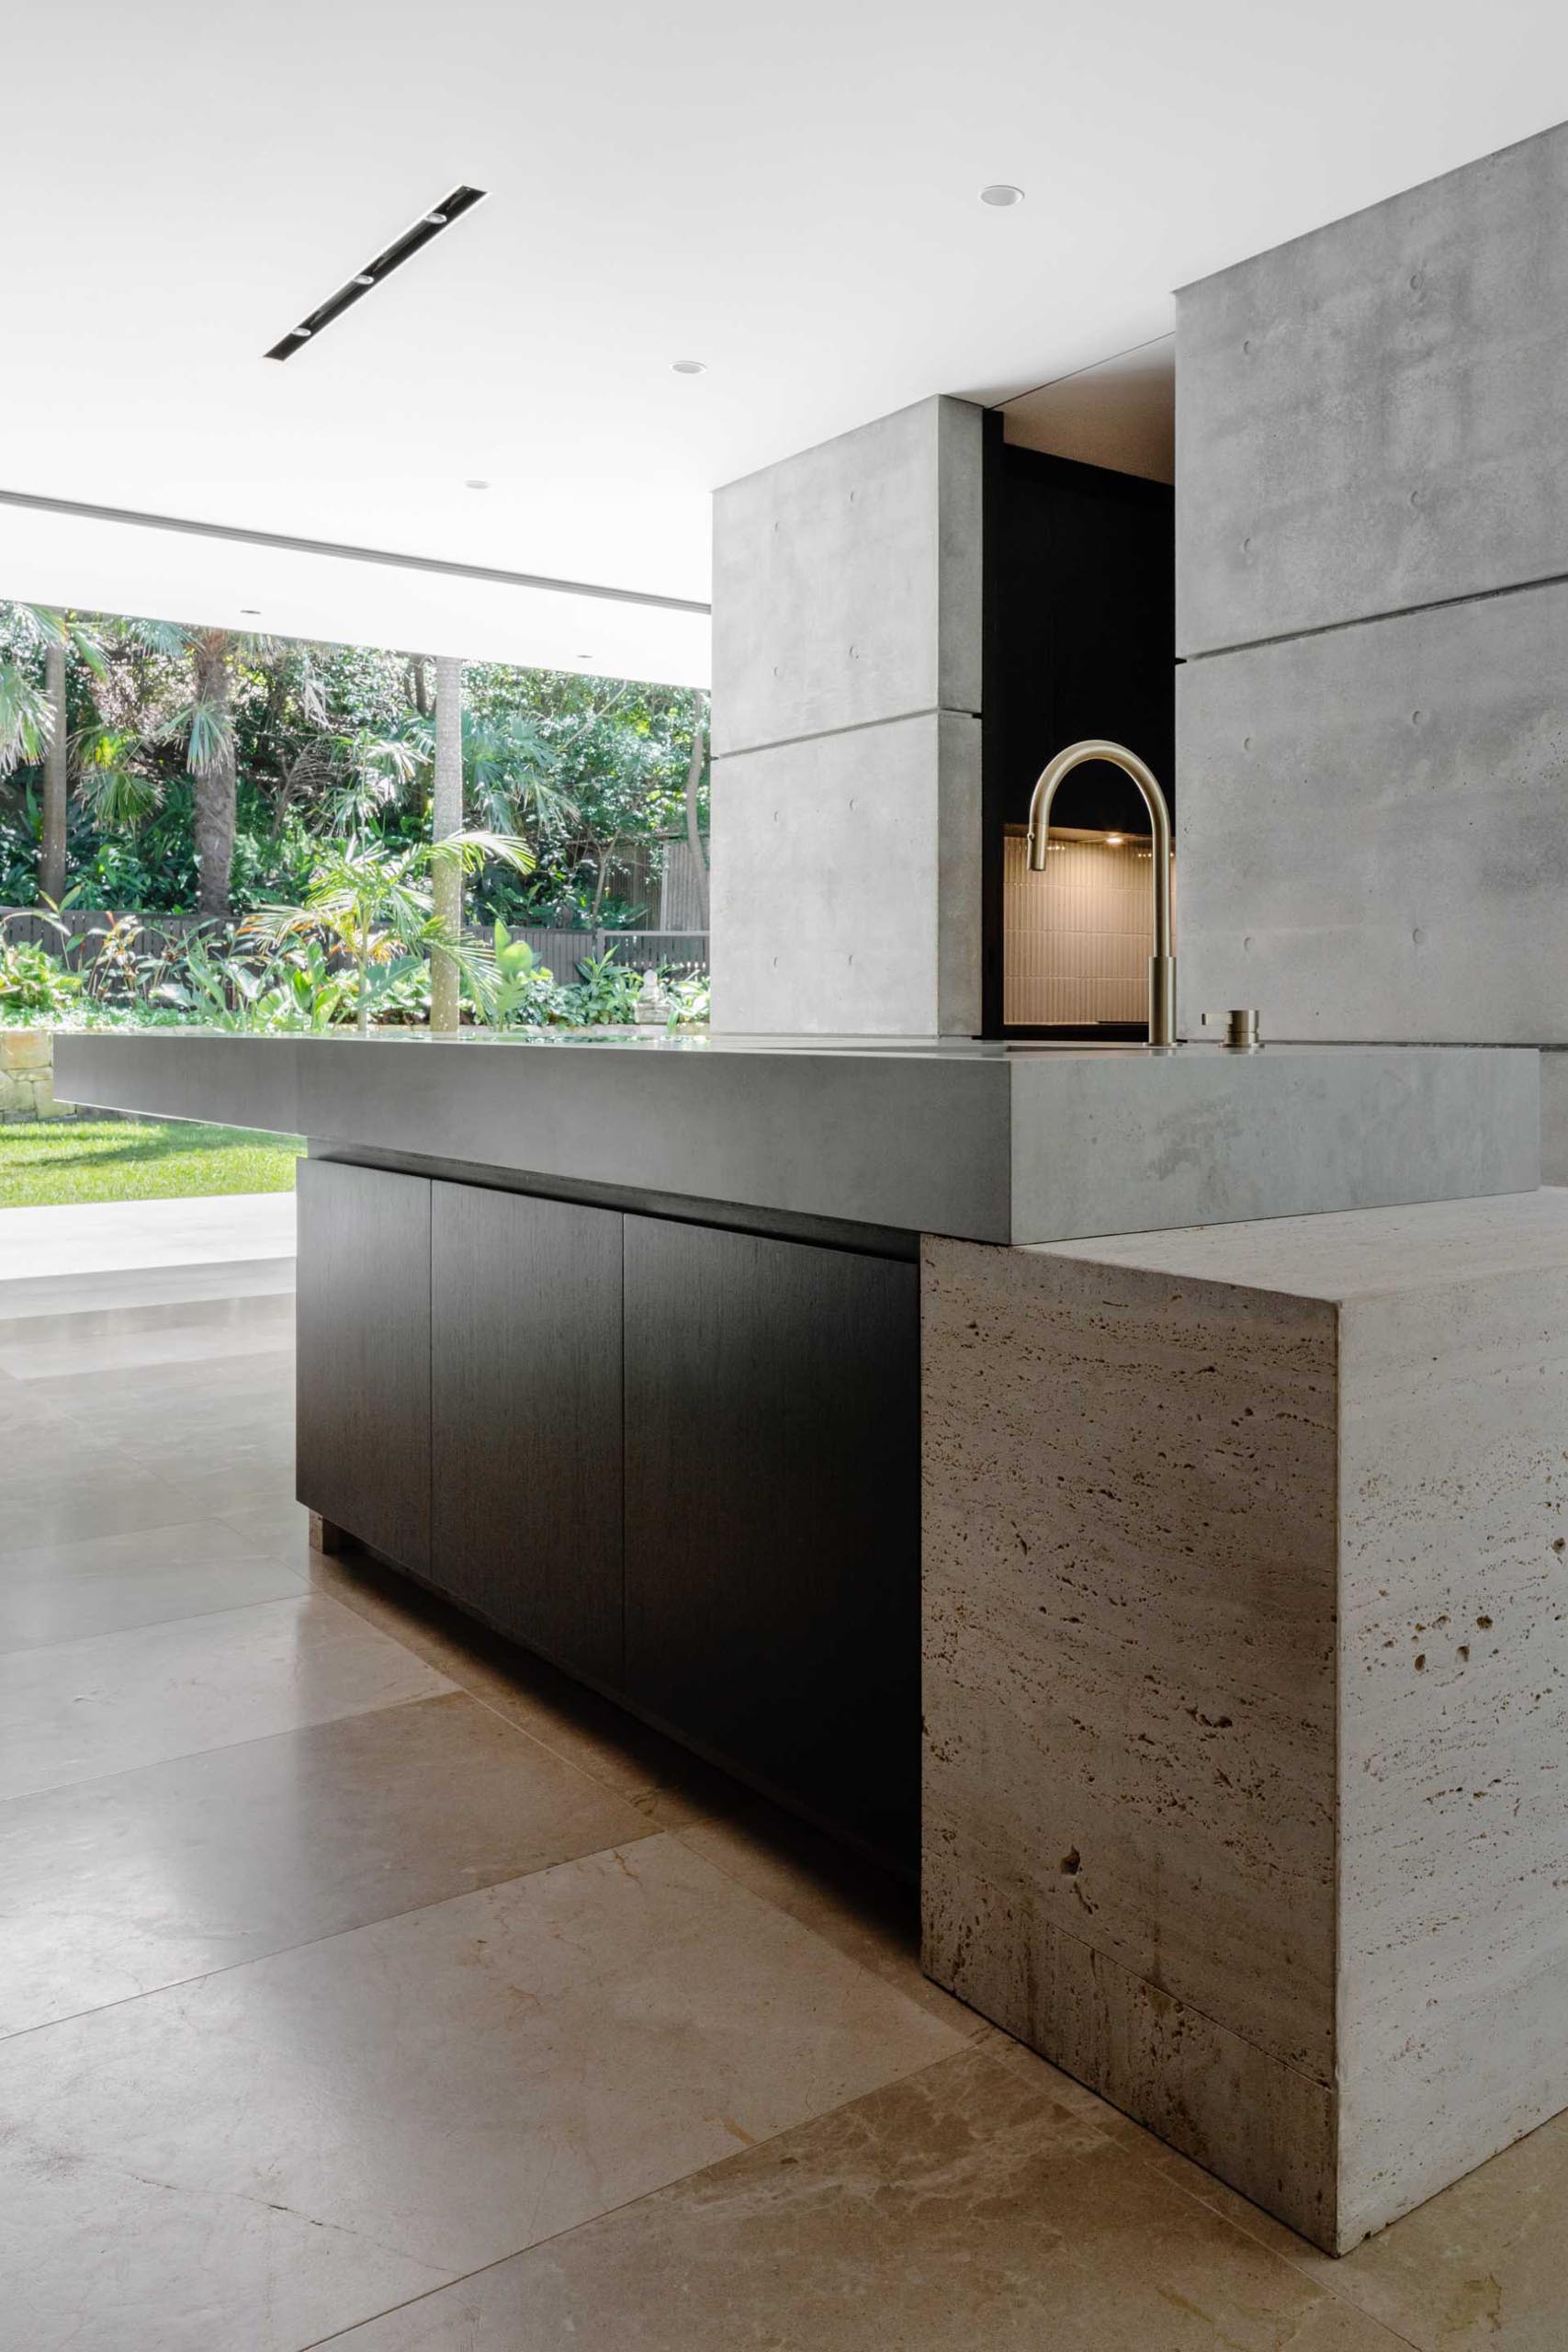 A modern kitchen includes a large cantilevered island and limestone tiled floors.